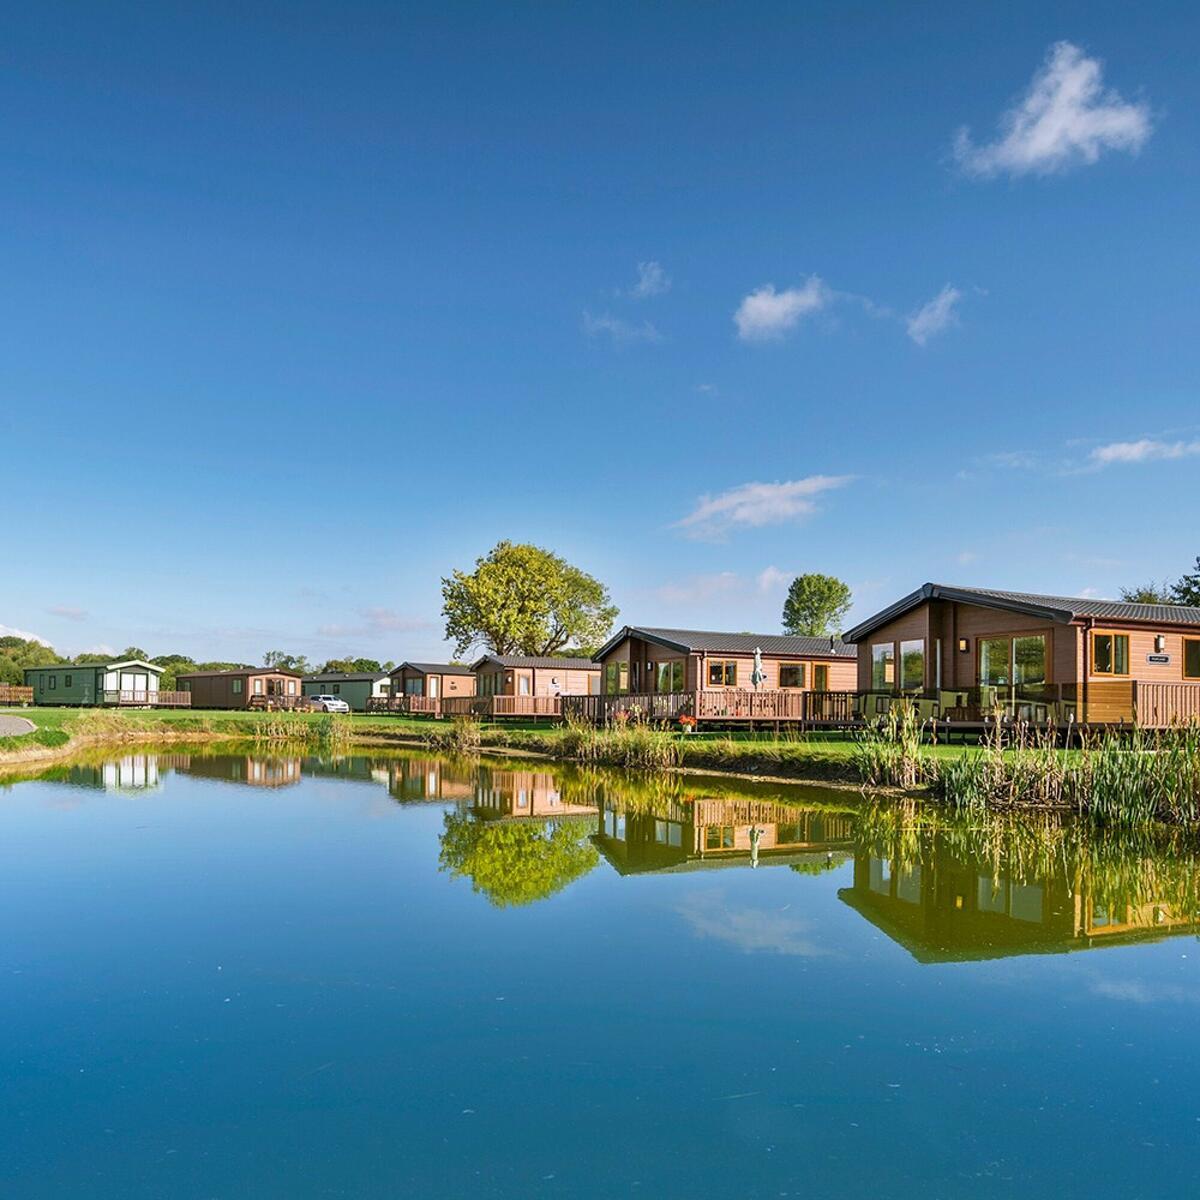 Privately owned lake edge holiday lodges at Arrow Bank